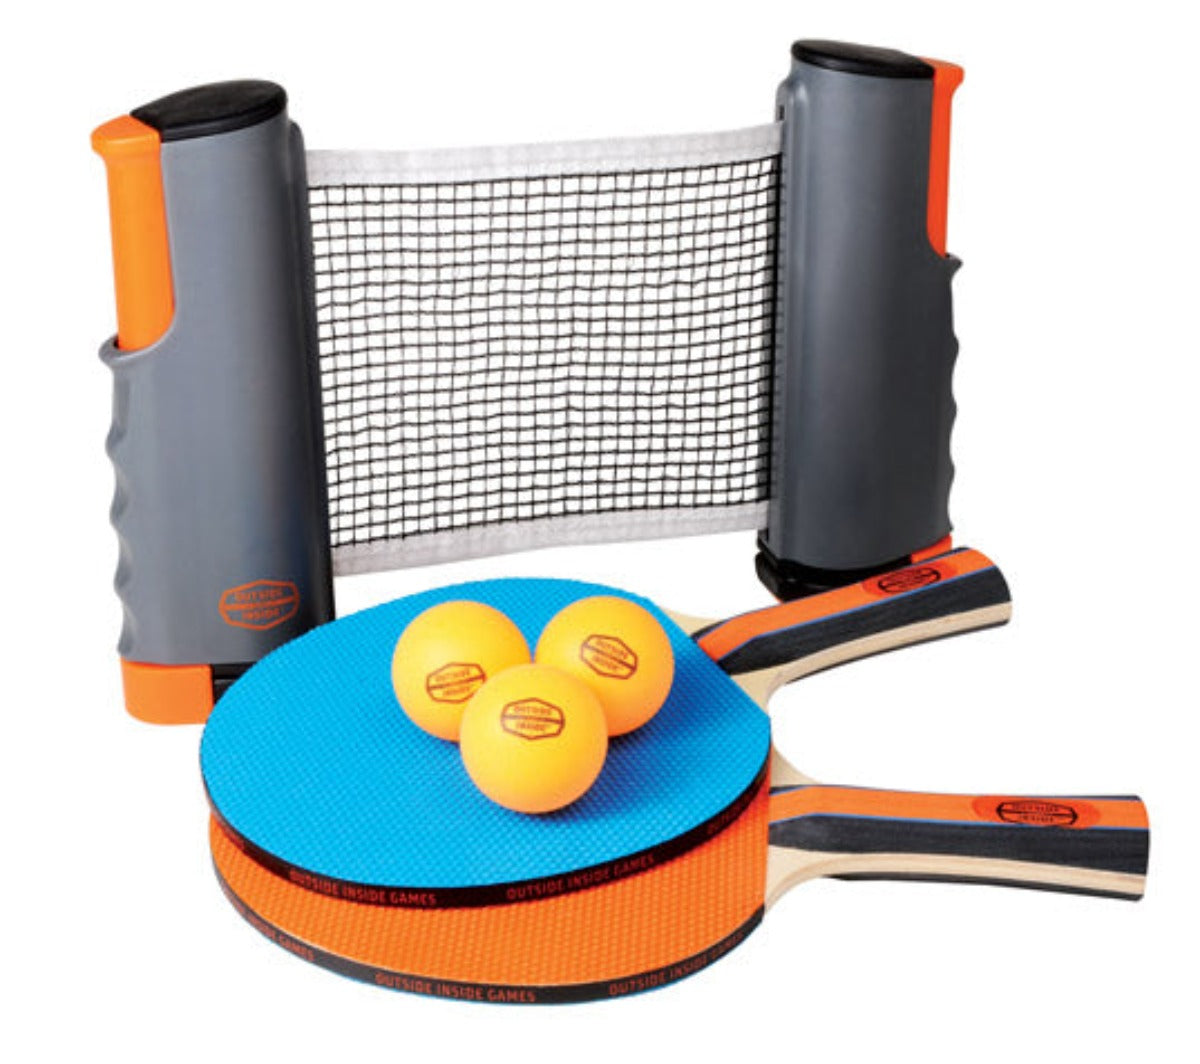 Backpack Table Tennis